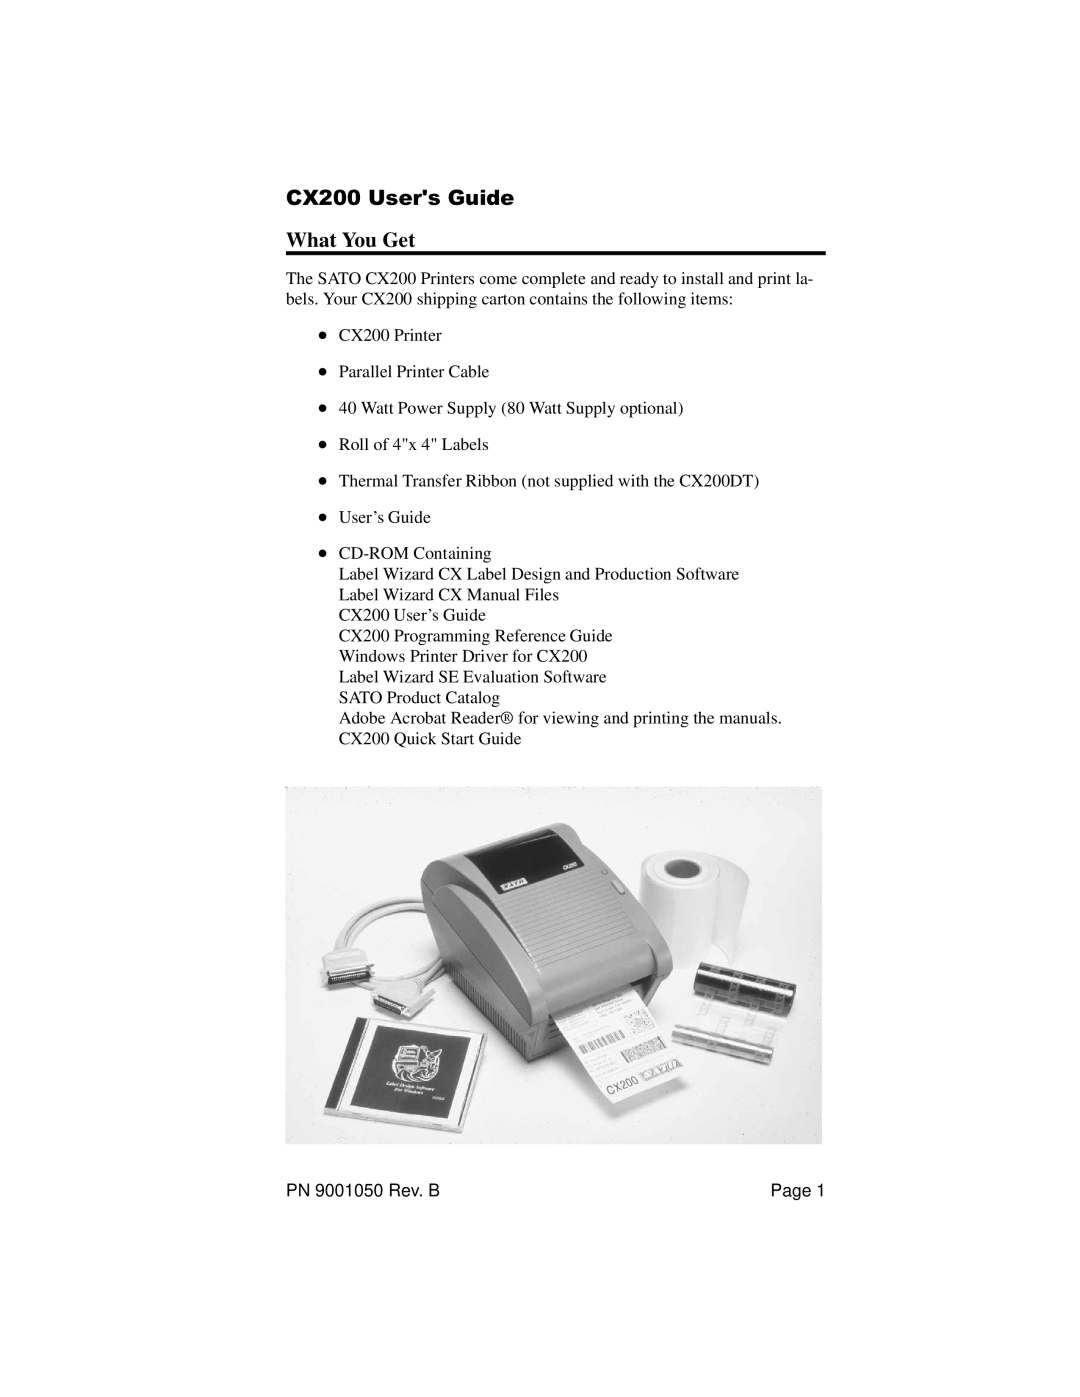 SATO manual What You Get, CX200 Users Guide 